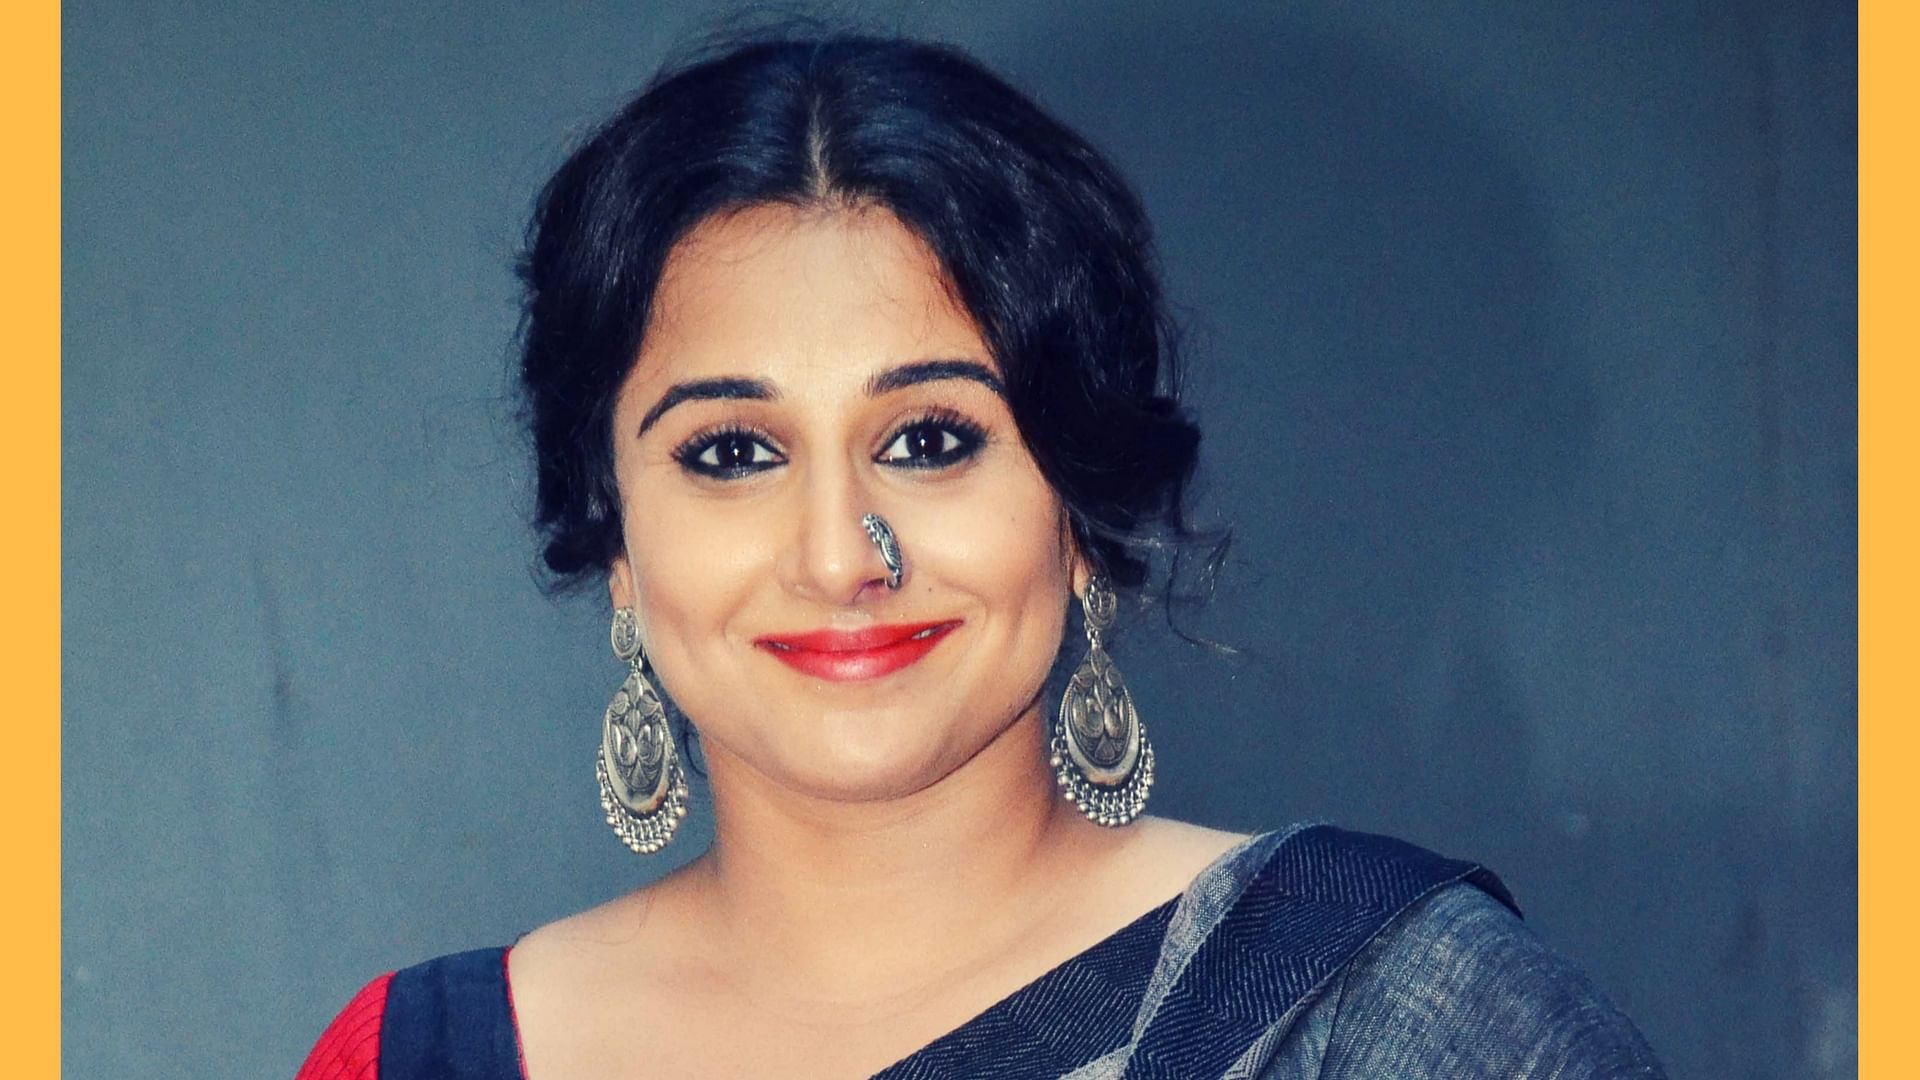 Vidya Balan rubbishes rumours of being pregnant with style. (Photo: Yogen Shah)